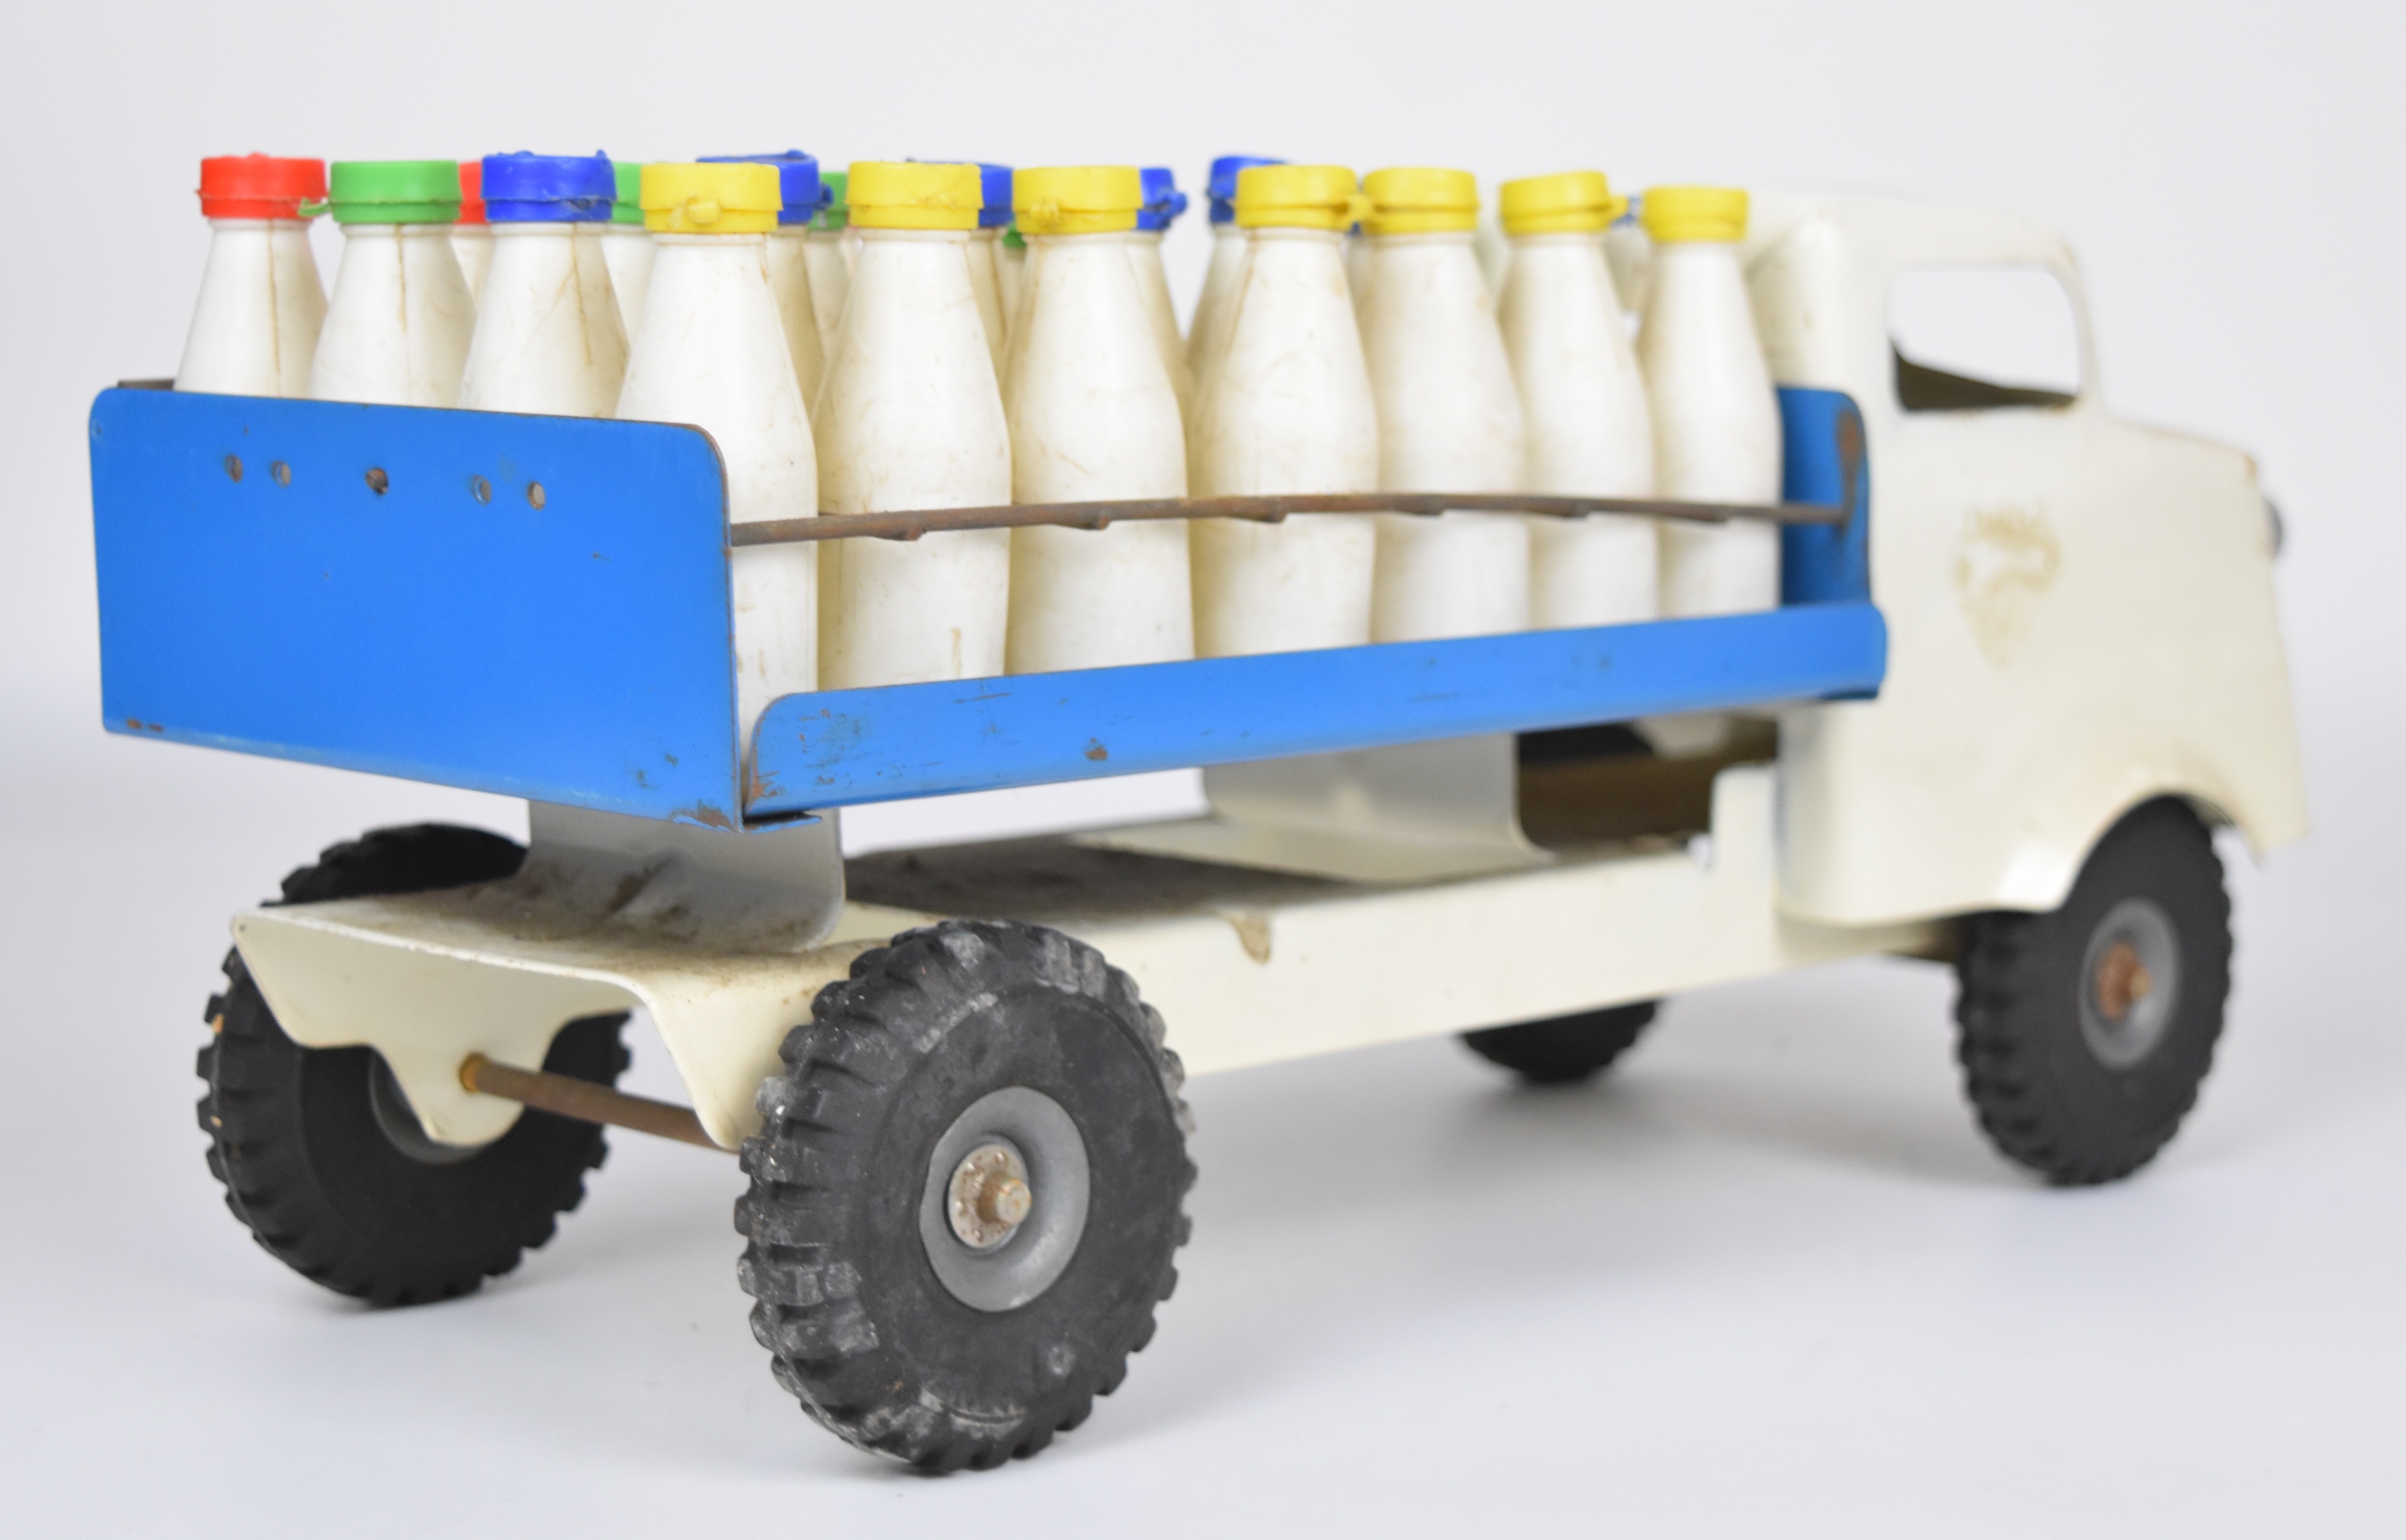 Tri-ang pressed steel milk truck or float with white cab and blue bed, complete with milk bottles. - Image 3 of 4